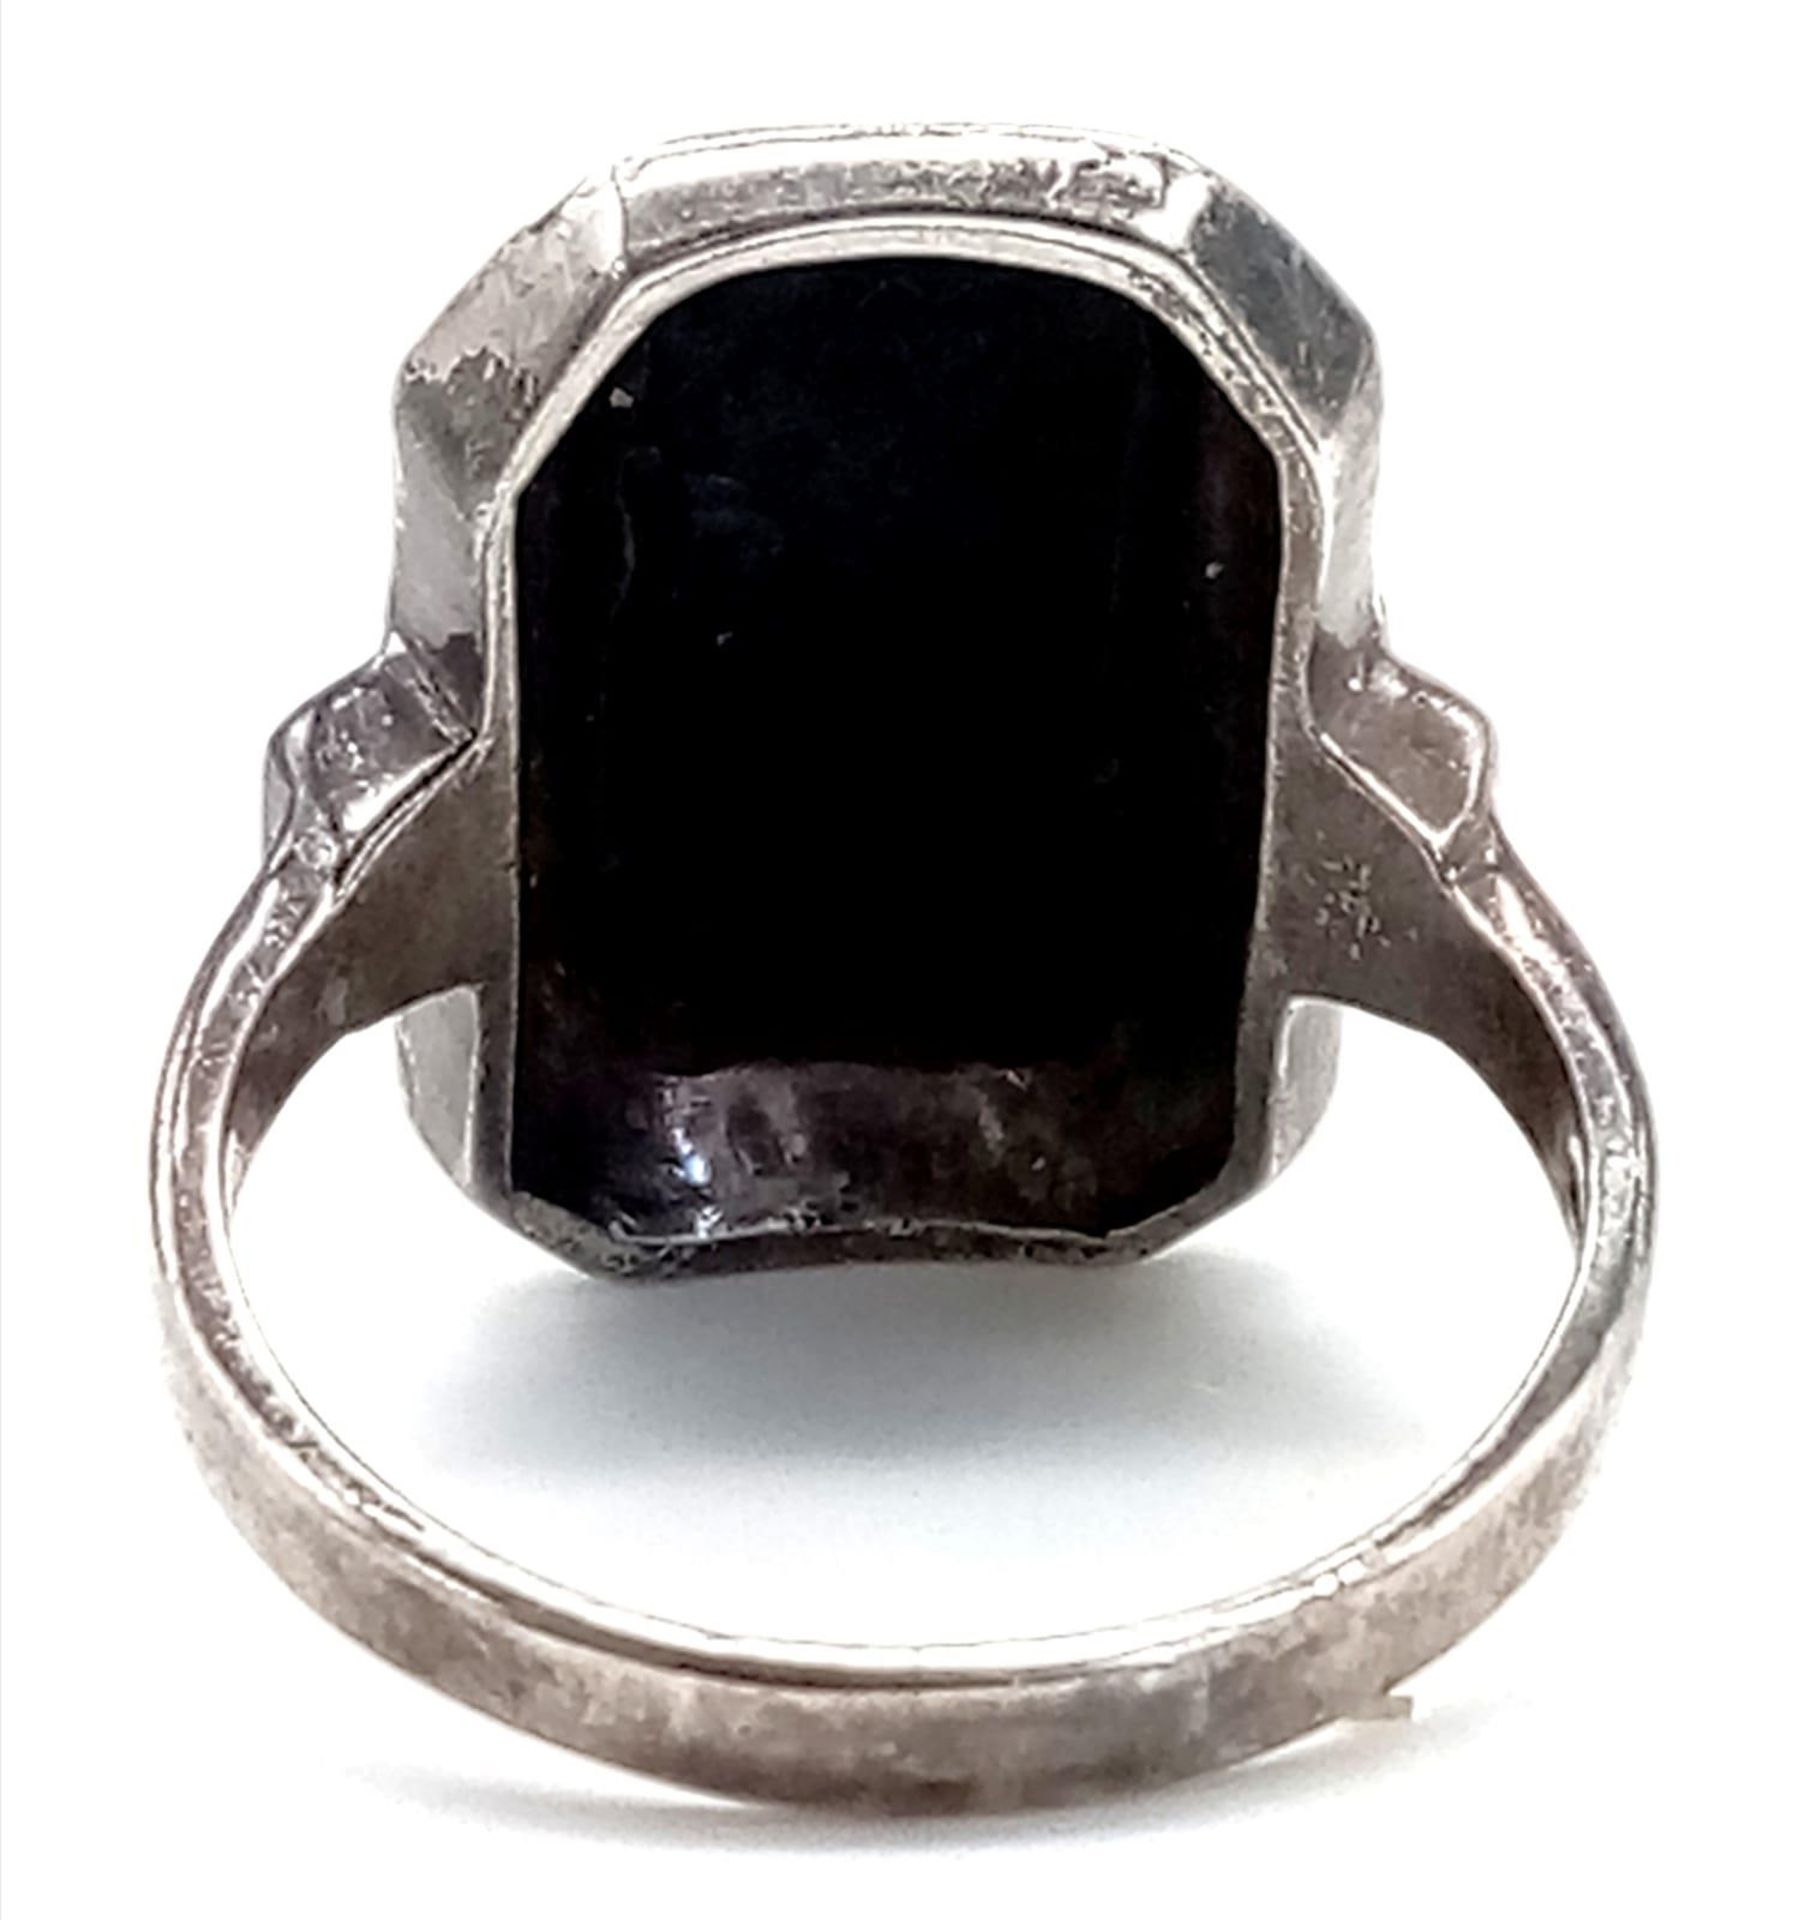 A 925 silver large black onyx with gemstone decoration surrounding. Total weight 5.85G. Size Q. 2 - Image 4 of 5